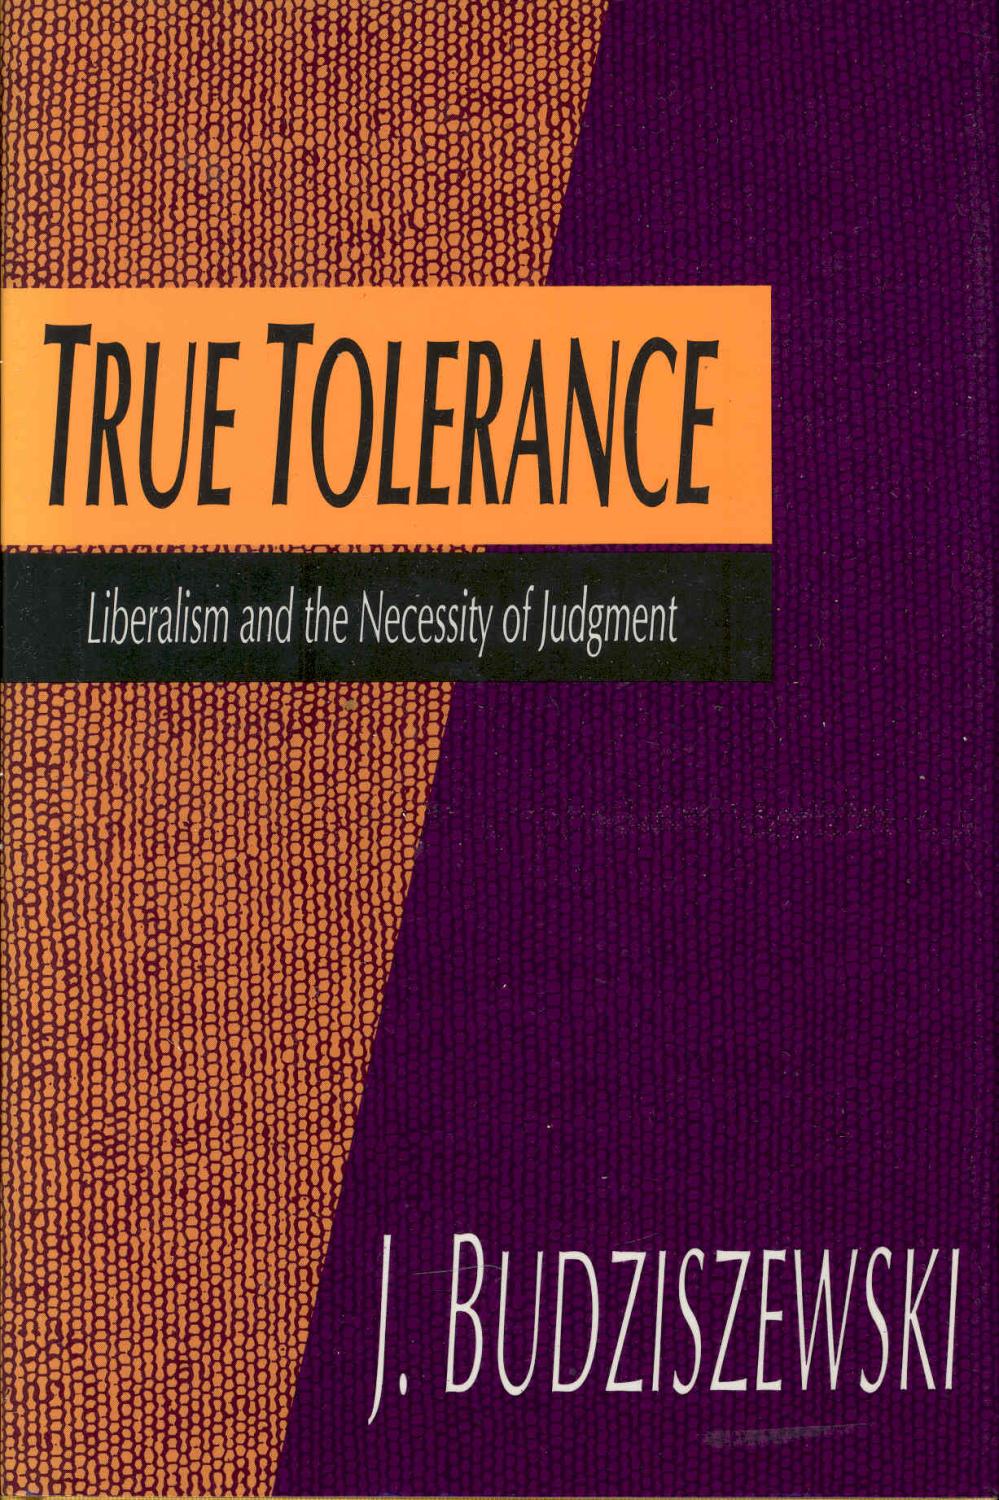 True tolerance : liberalism and the necessity of judgment [The Idea -- Illustrations of True Tolerance in Three Spheres of Regulation -- Is True Tolerance Constitutional? -- The Heads of the Hydra -- Arguments for Ethical Neutrality -- An Exploded View of - Budziszewski, J., 1952-